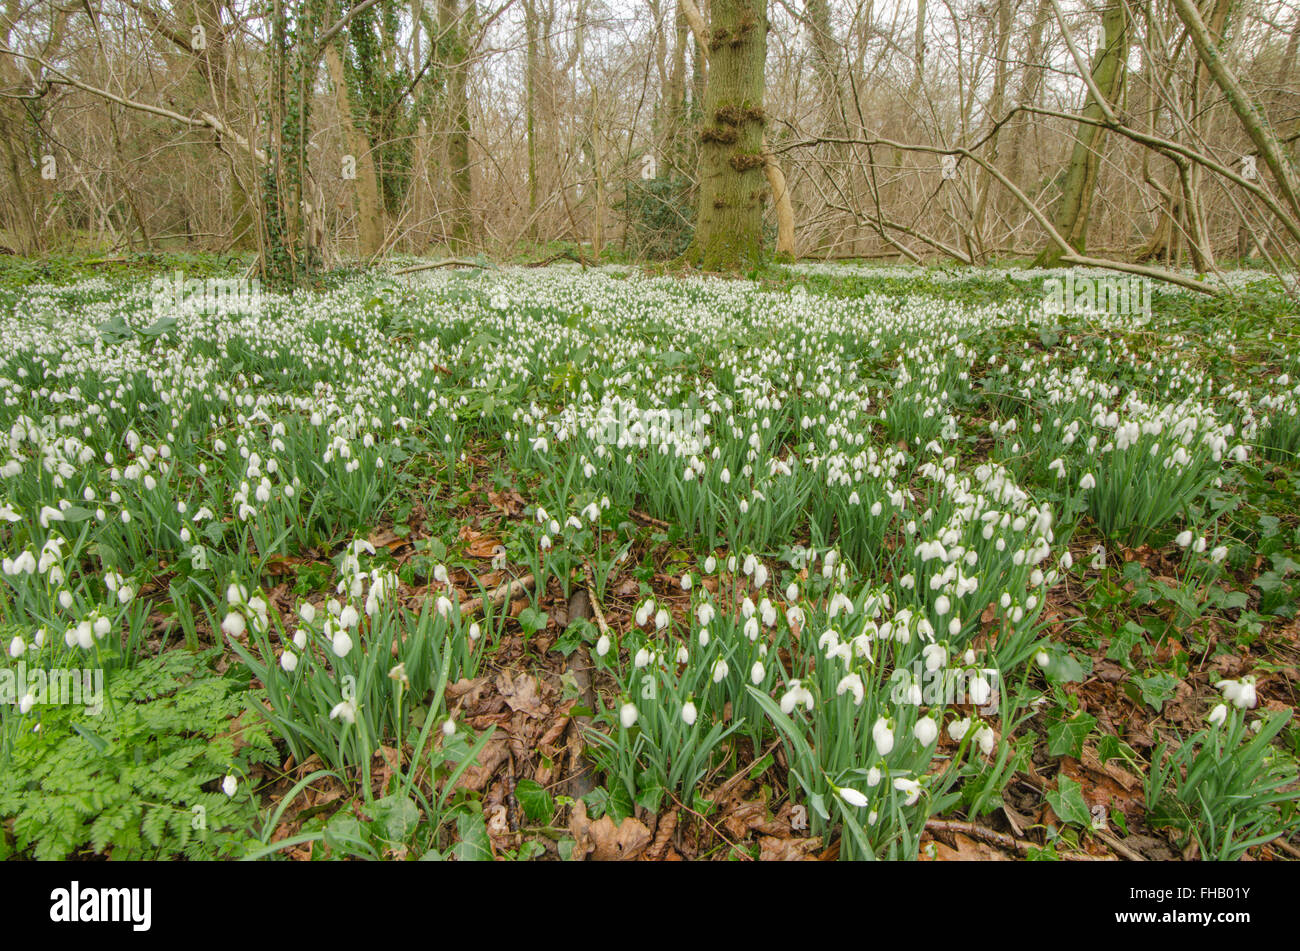 Snowdrop (Galanthus nivalis) massed in old hazel coppice near Petworth, West Sussex, UK. February. Stock Photo